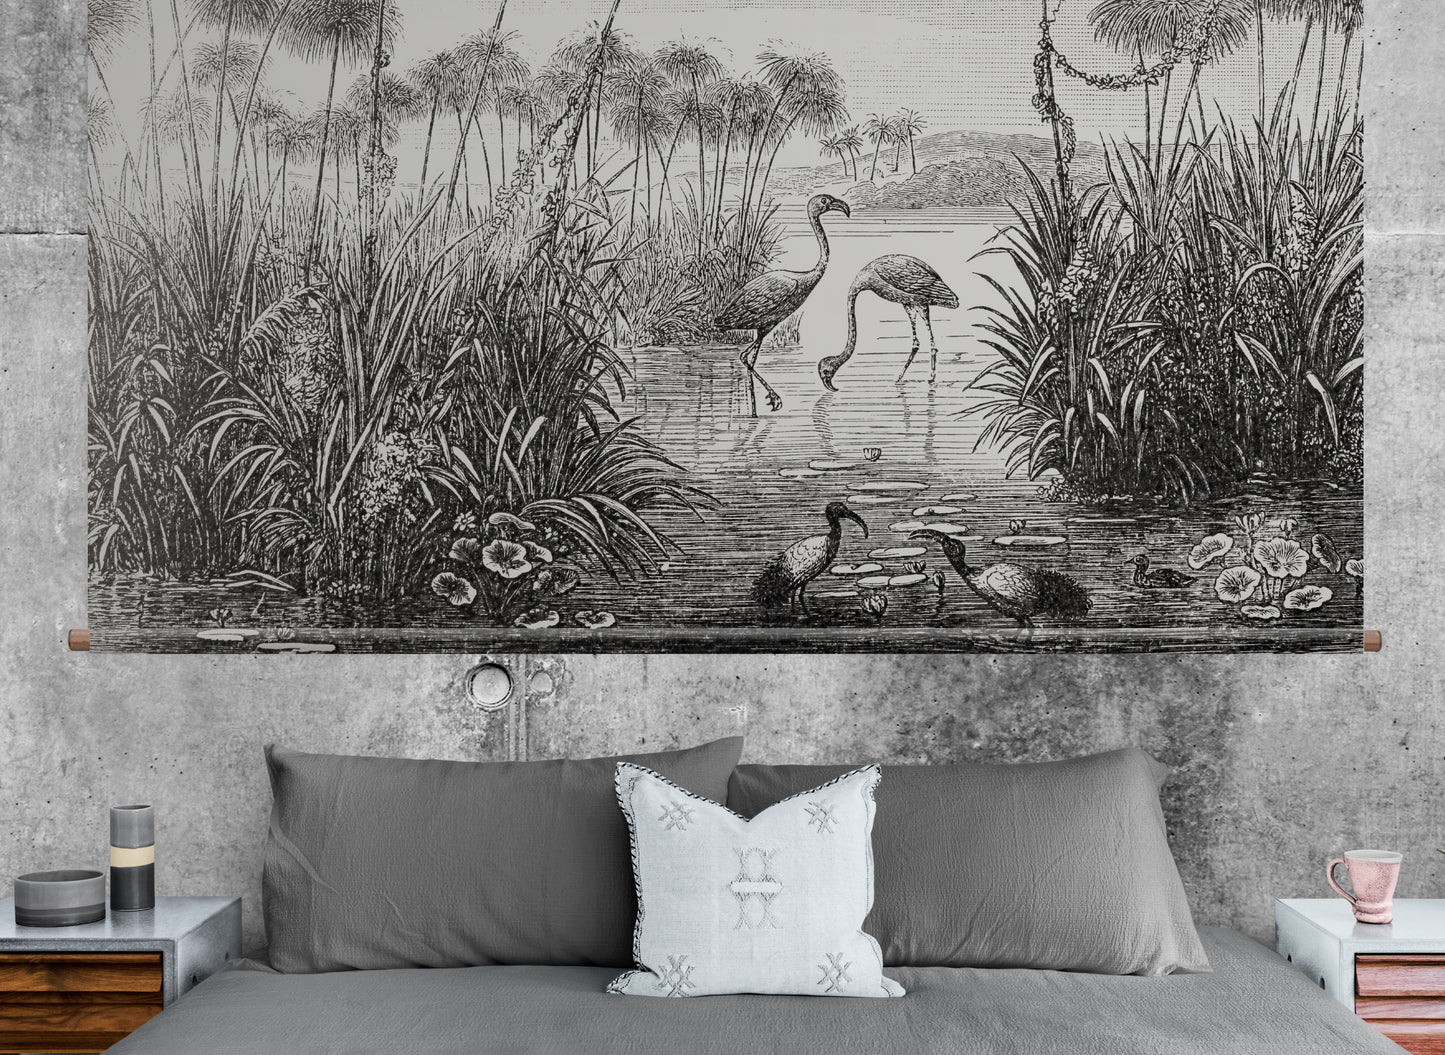 Flamingos in a pound wall hanging